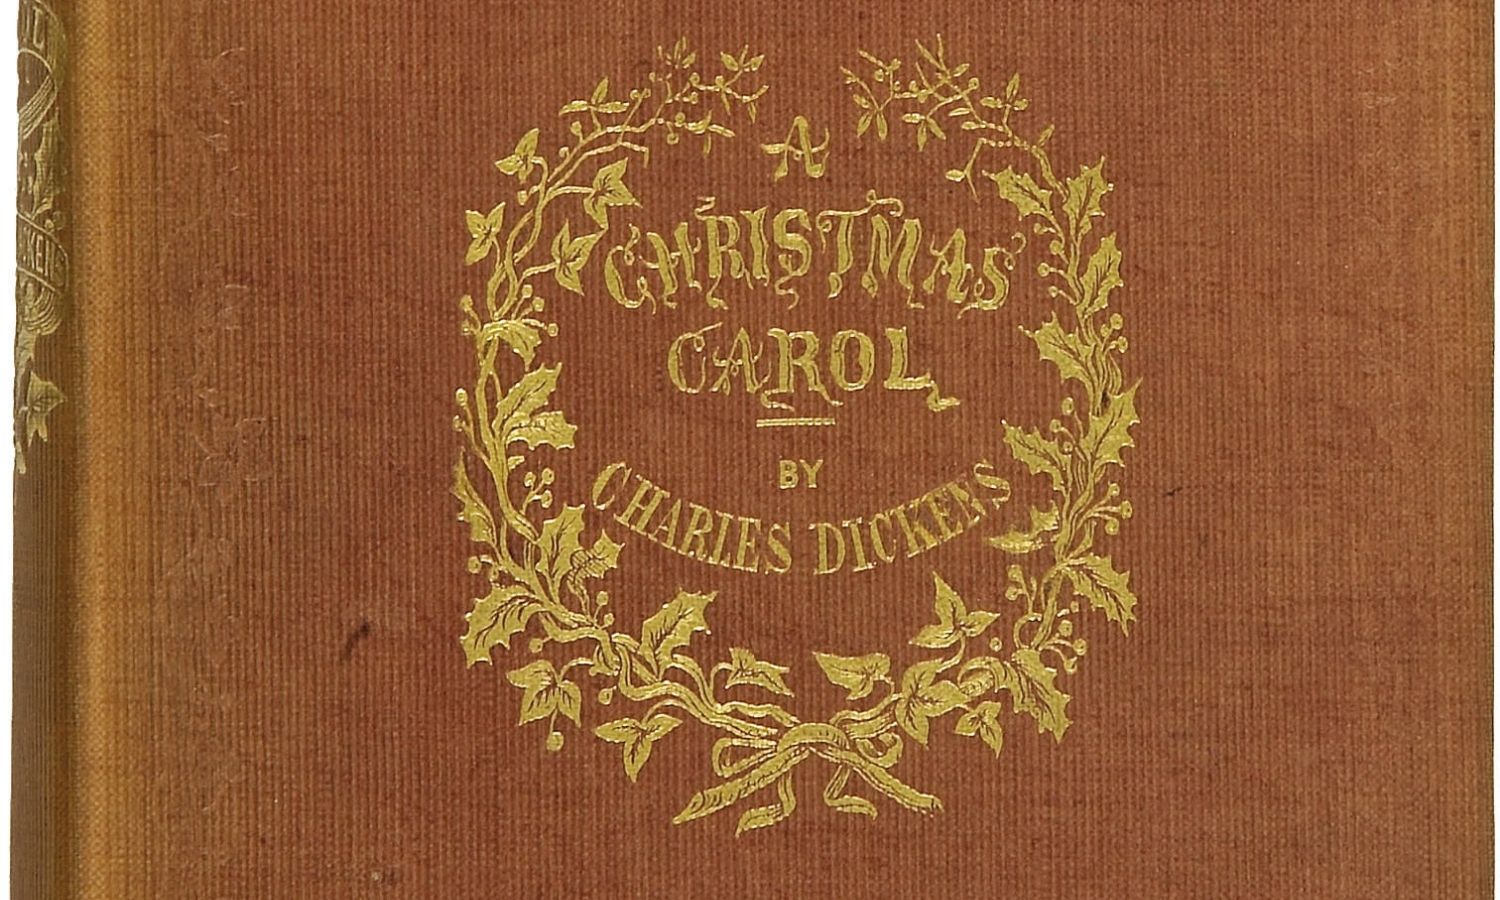 OTD in 1843: A Christmas Carol by English author Charles Dickens was published.